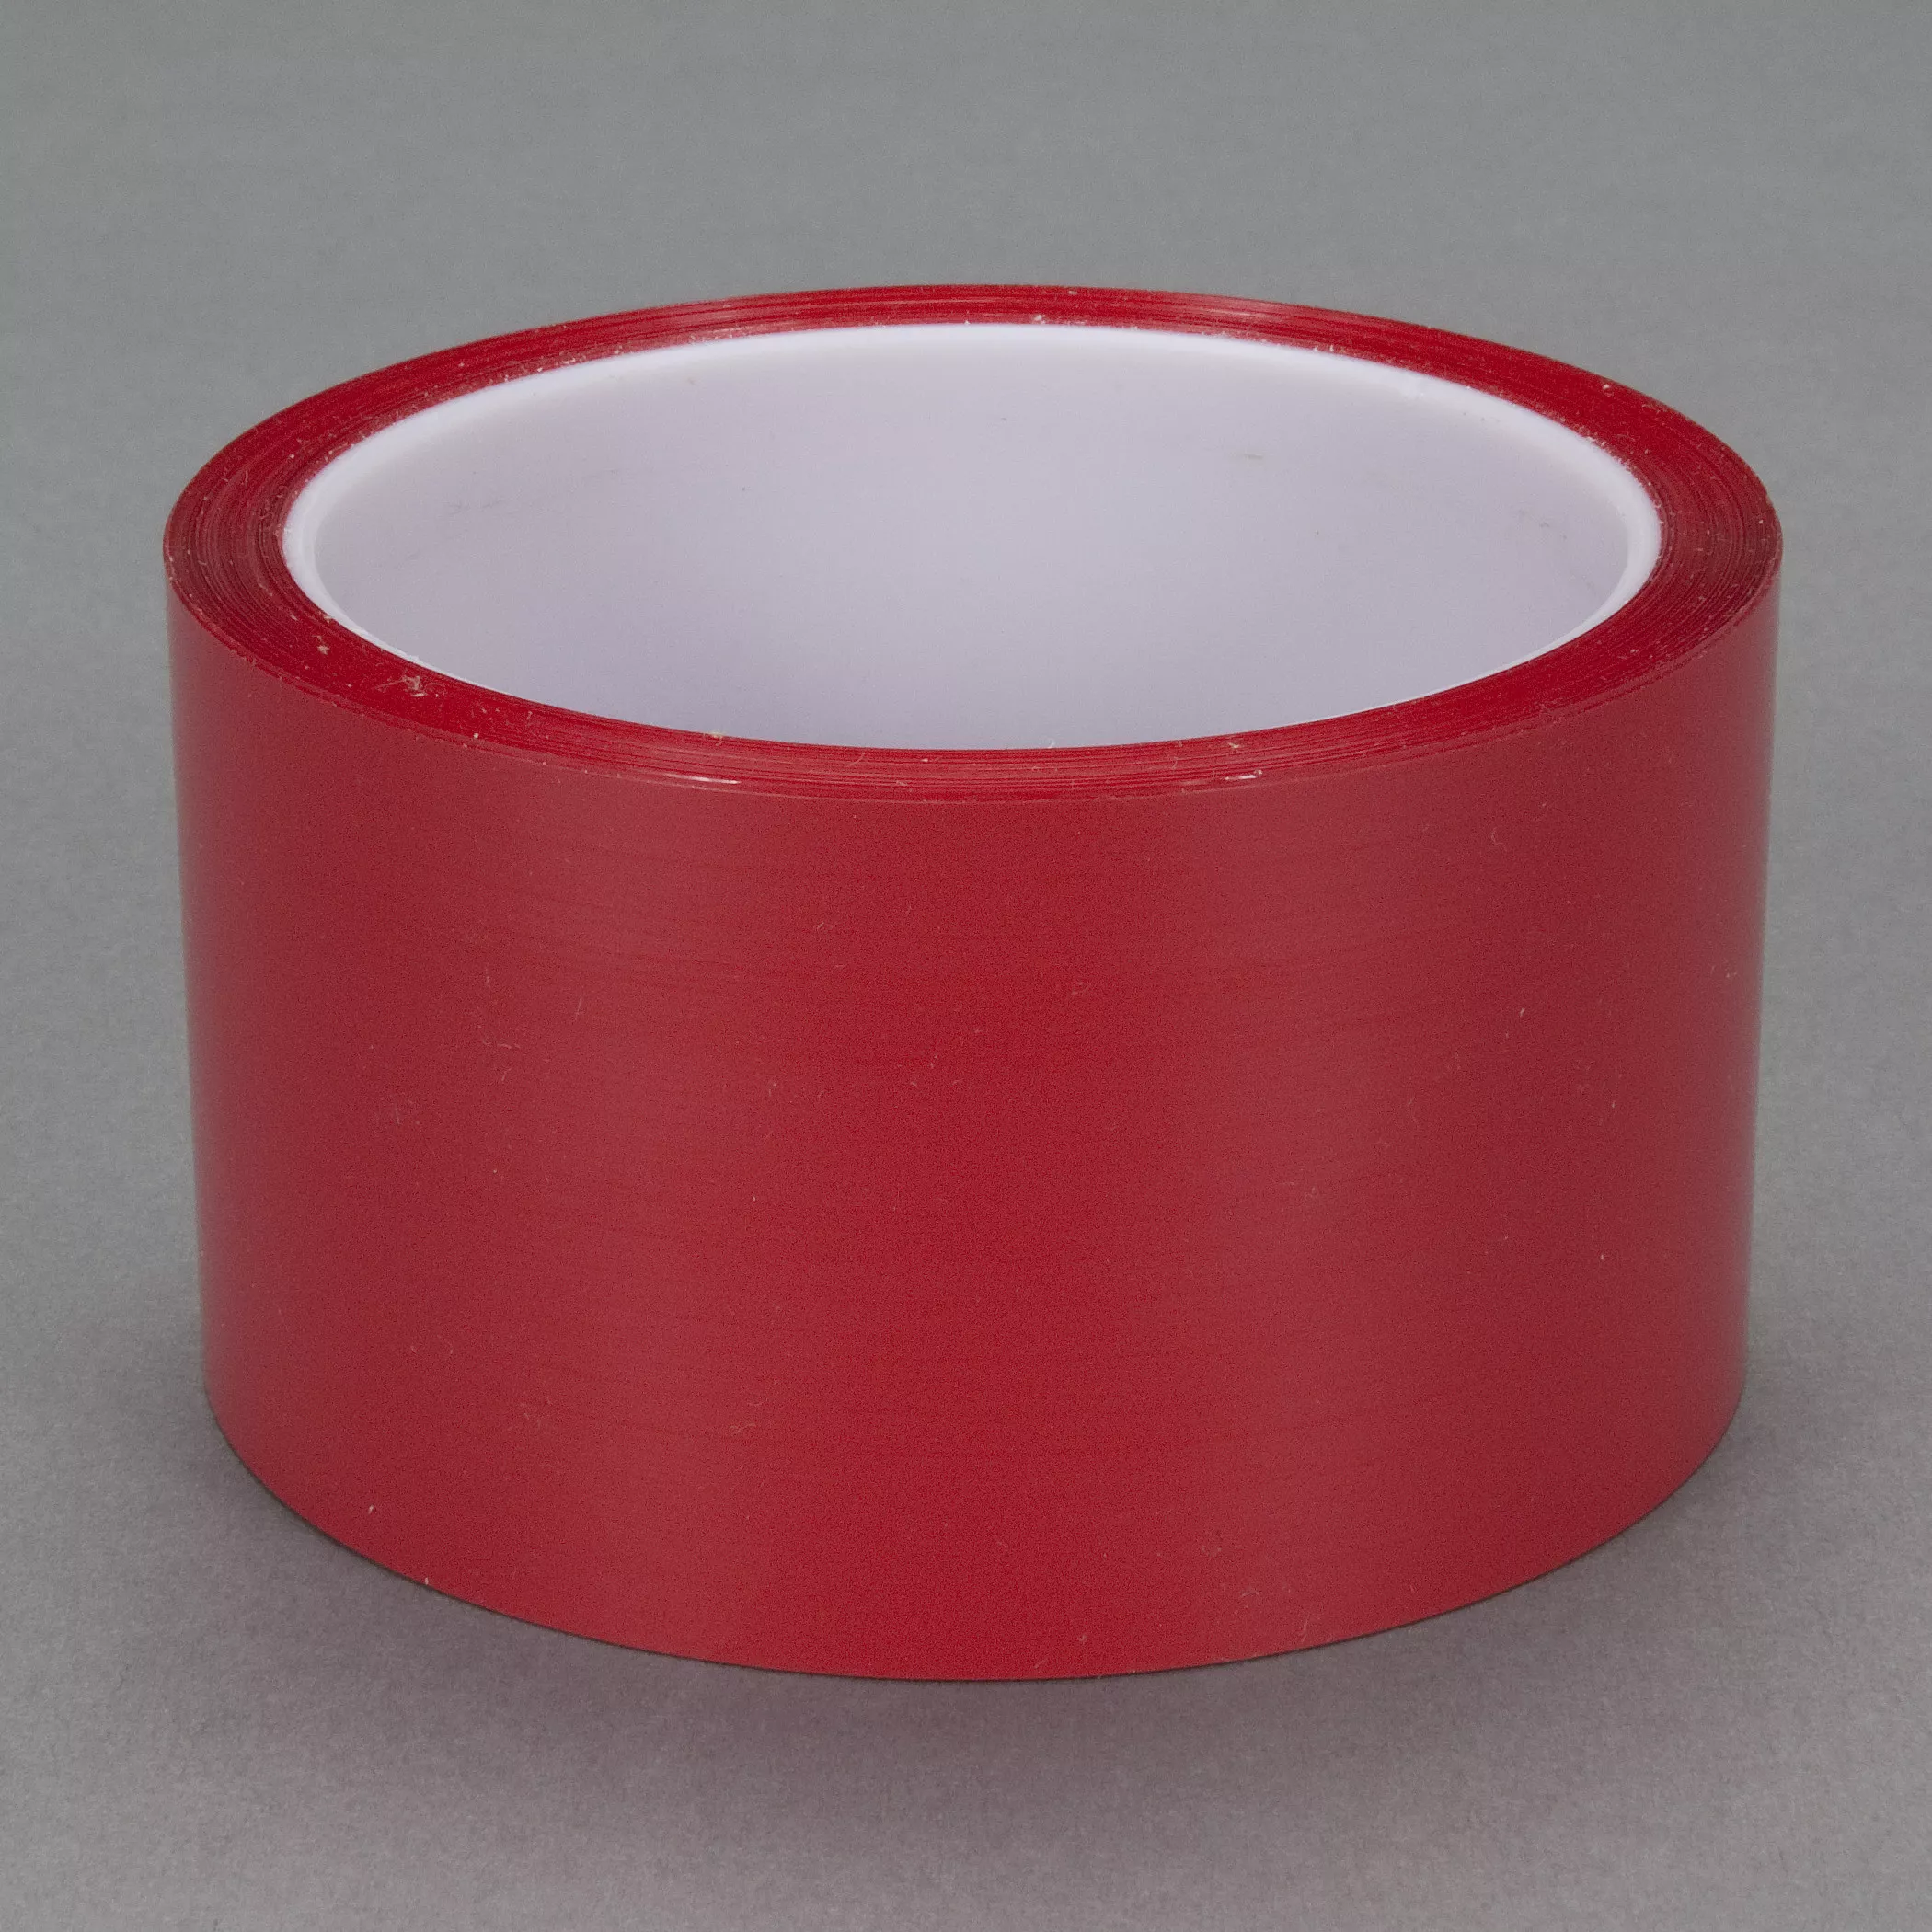 3M™ Polyester Film Tape 850, Red, 2 in x 72 yd, 1.9 mil, 24 Roll/Case